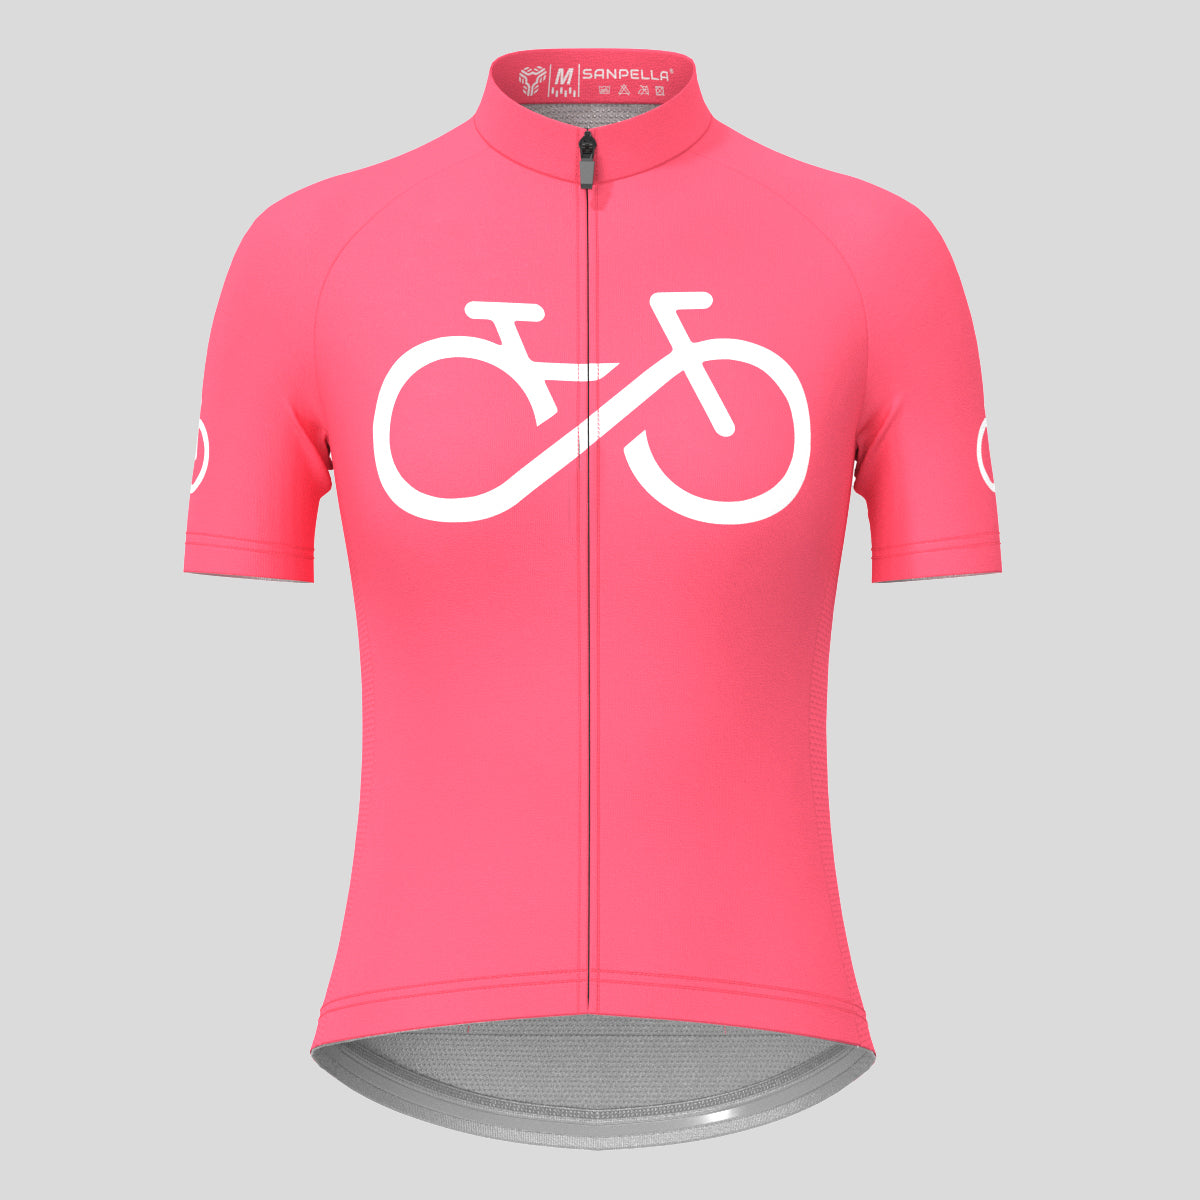 Bike Forever Women's Cycling Jersey - Pink